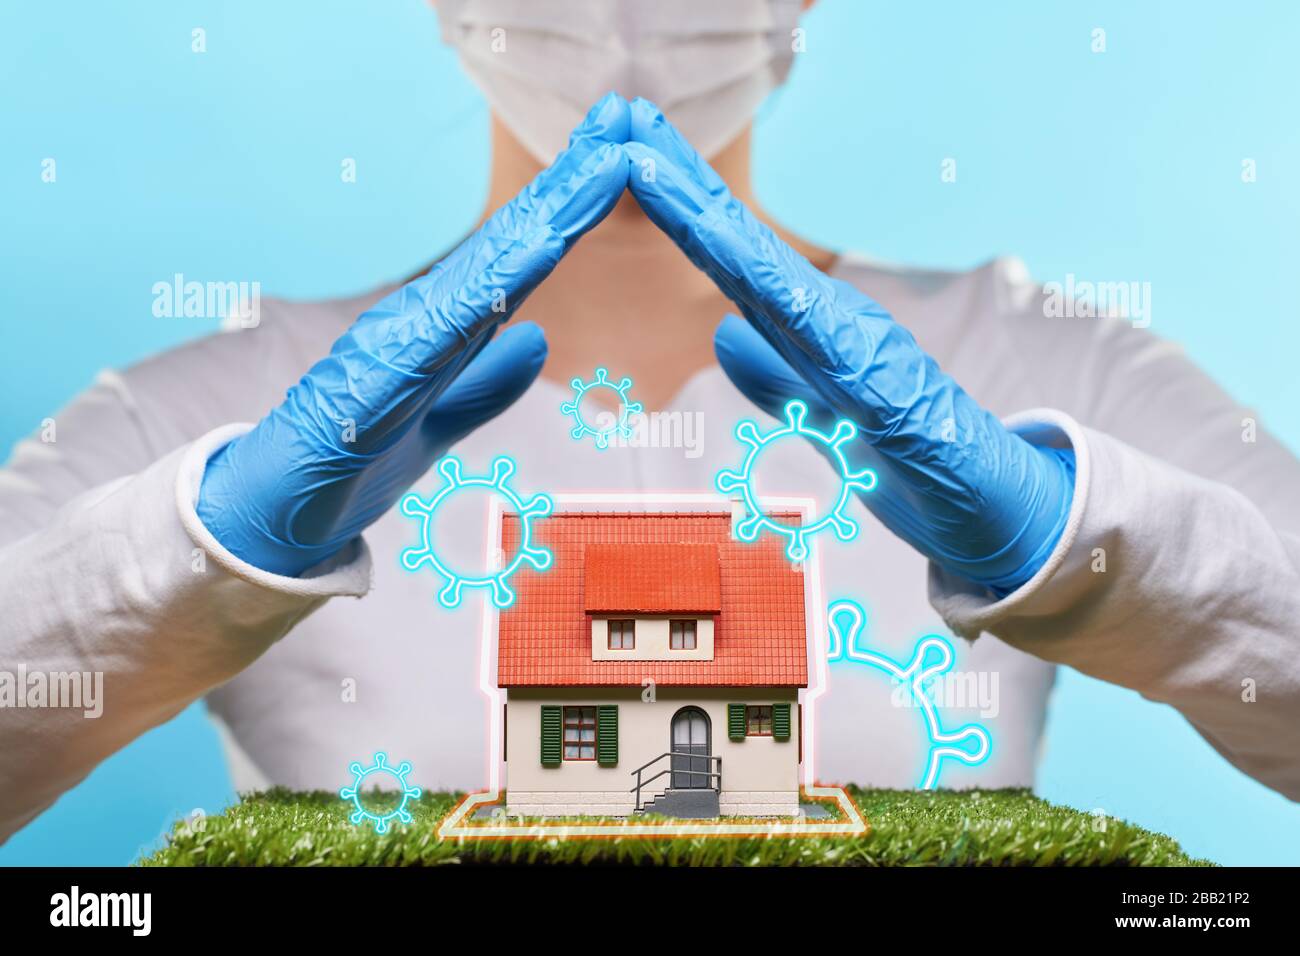 Woman in medical gloves and mask holds hands over a house. Concept of home stay, quarantine, security inside the house. Covid-19 Corona Prevention Mea Stock Photo